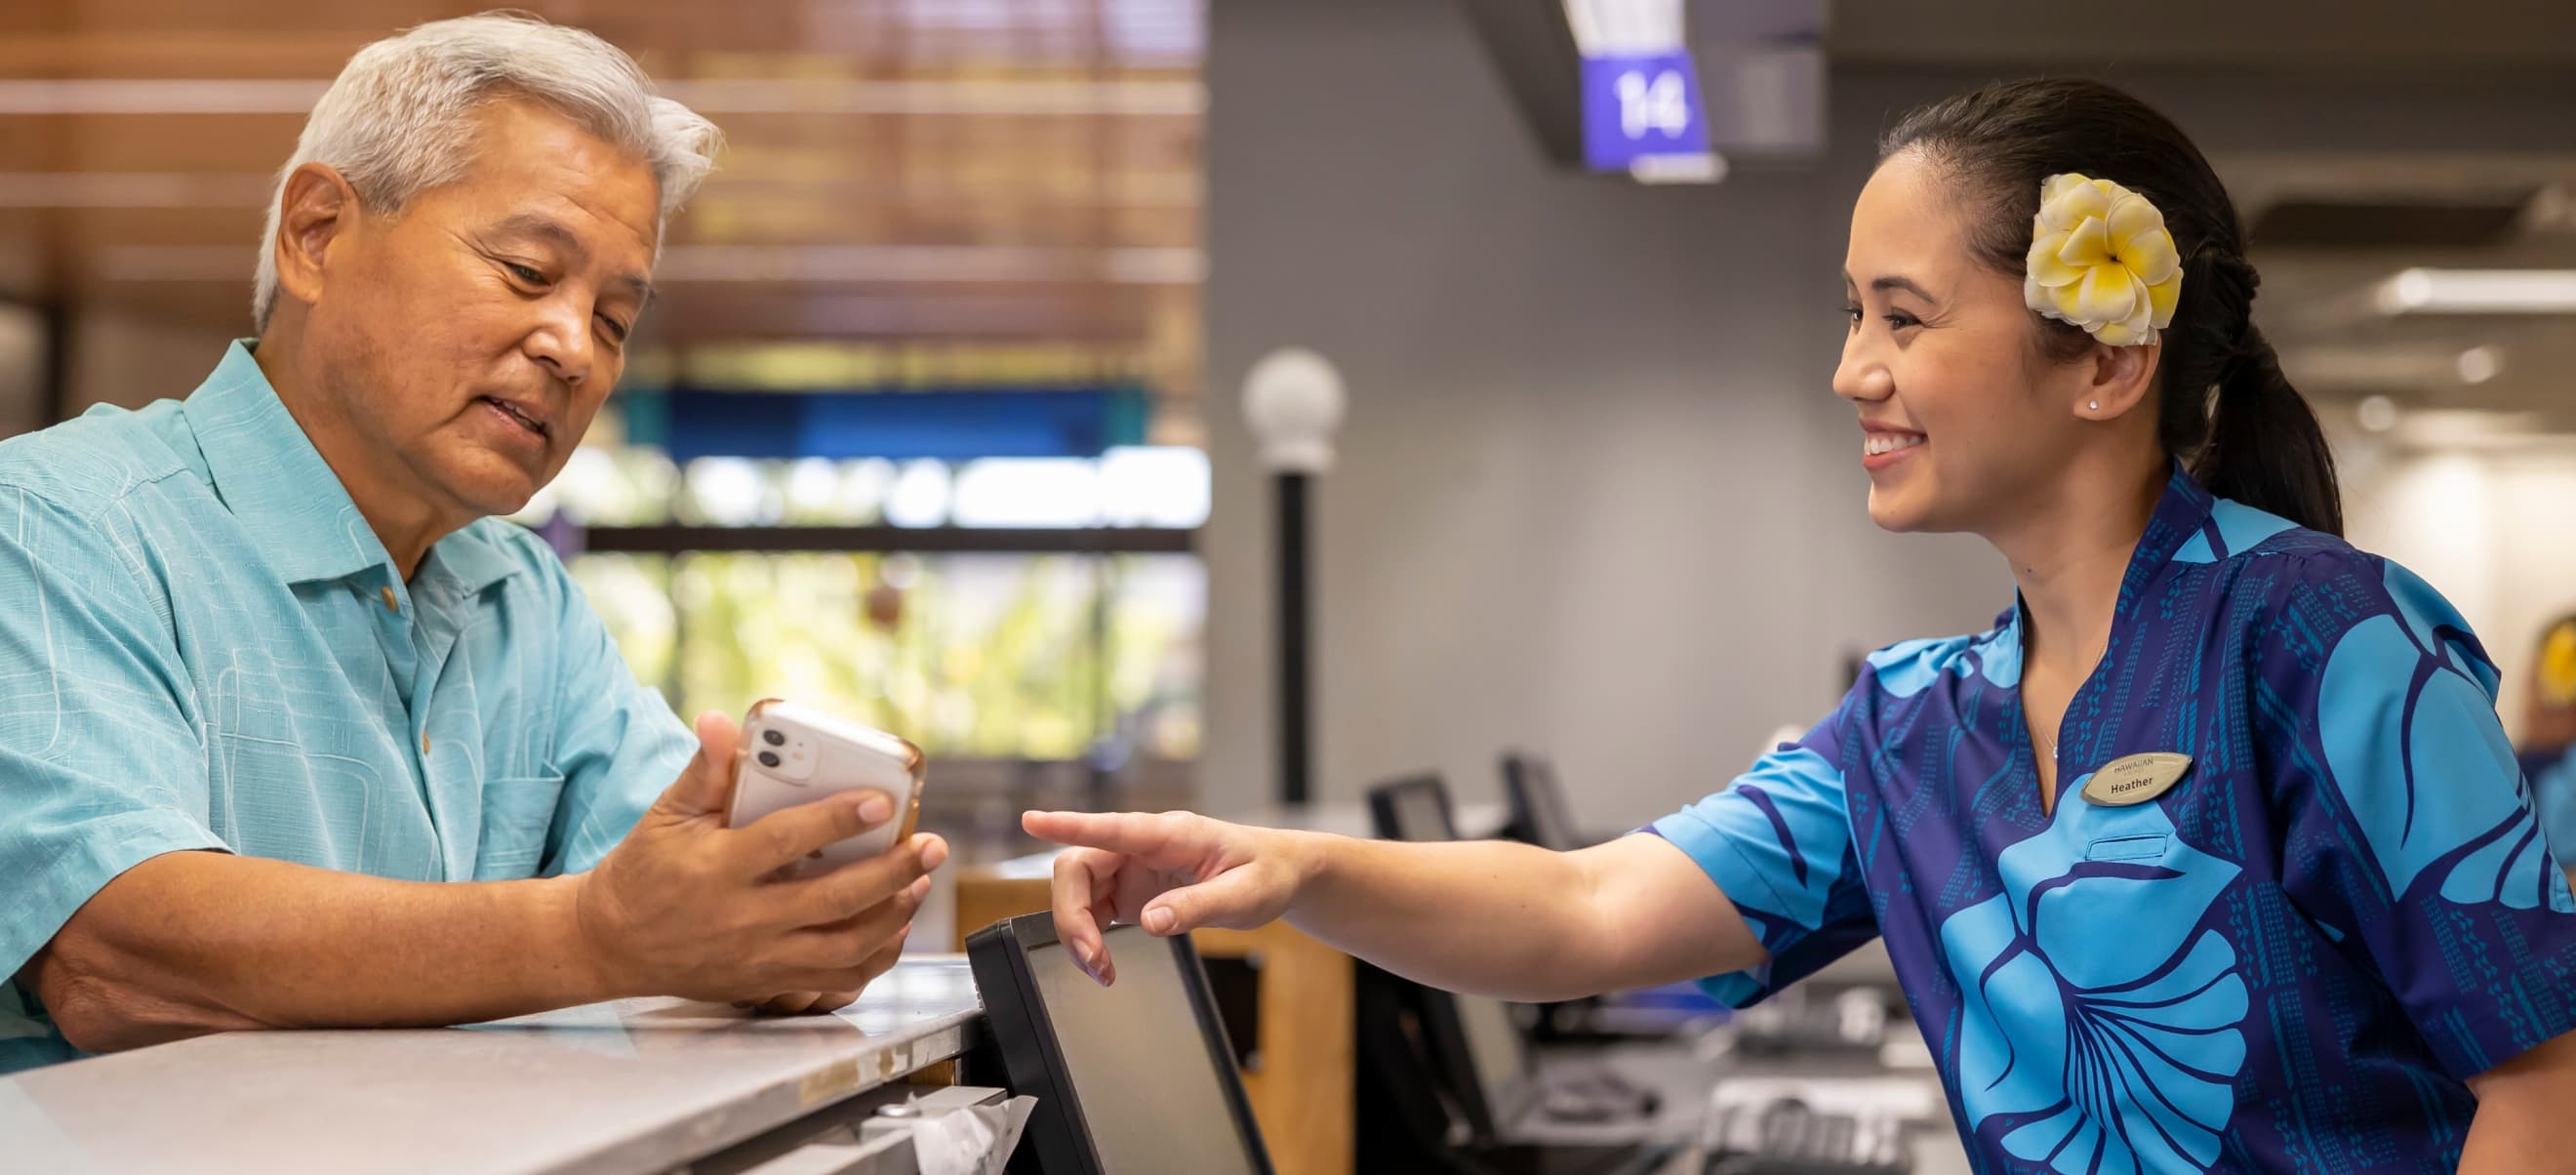 An elderly man in a blue shirt shows his Hawaiian Airlines app by ArcTouch to a smiling woman at a counter. The woman, wearing a blue uniform and flower in her hair, points to the phone.